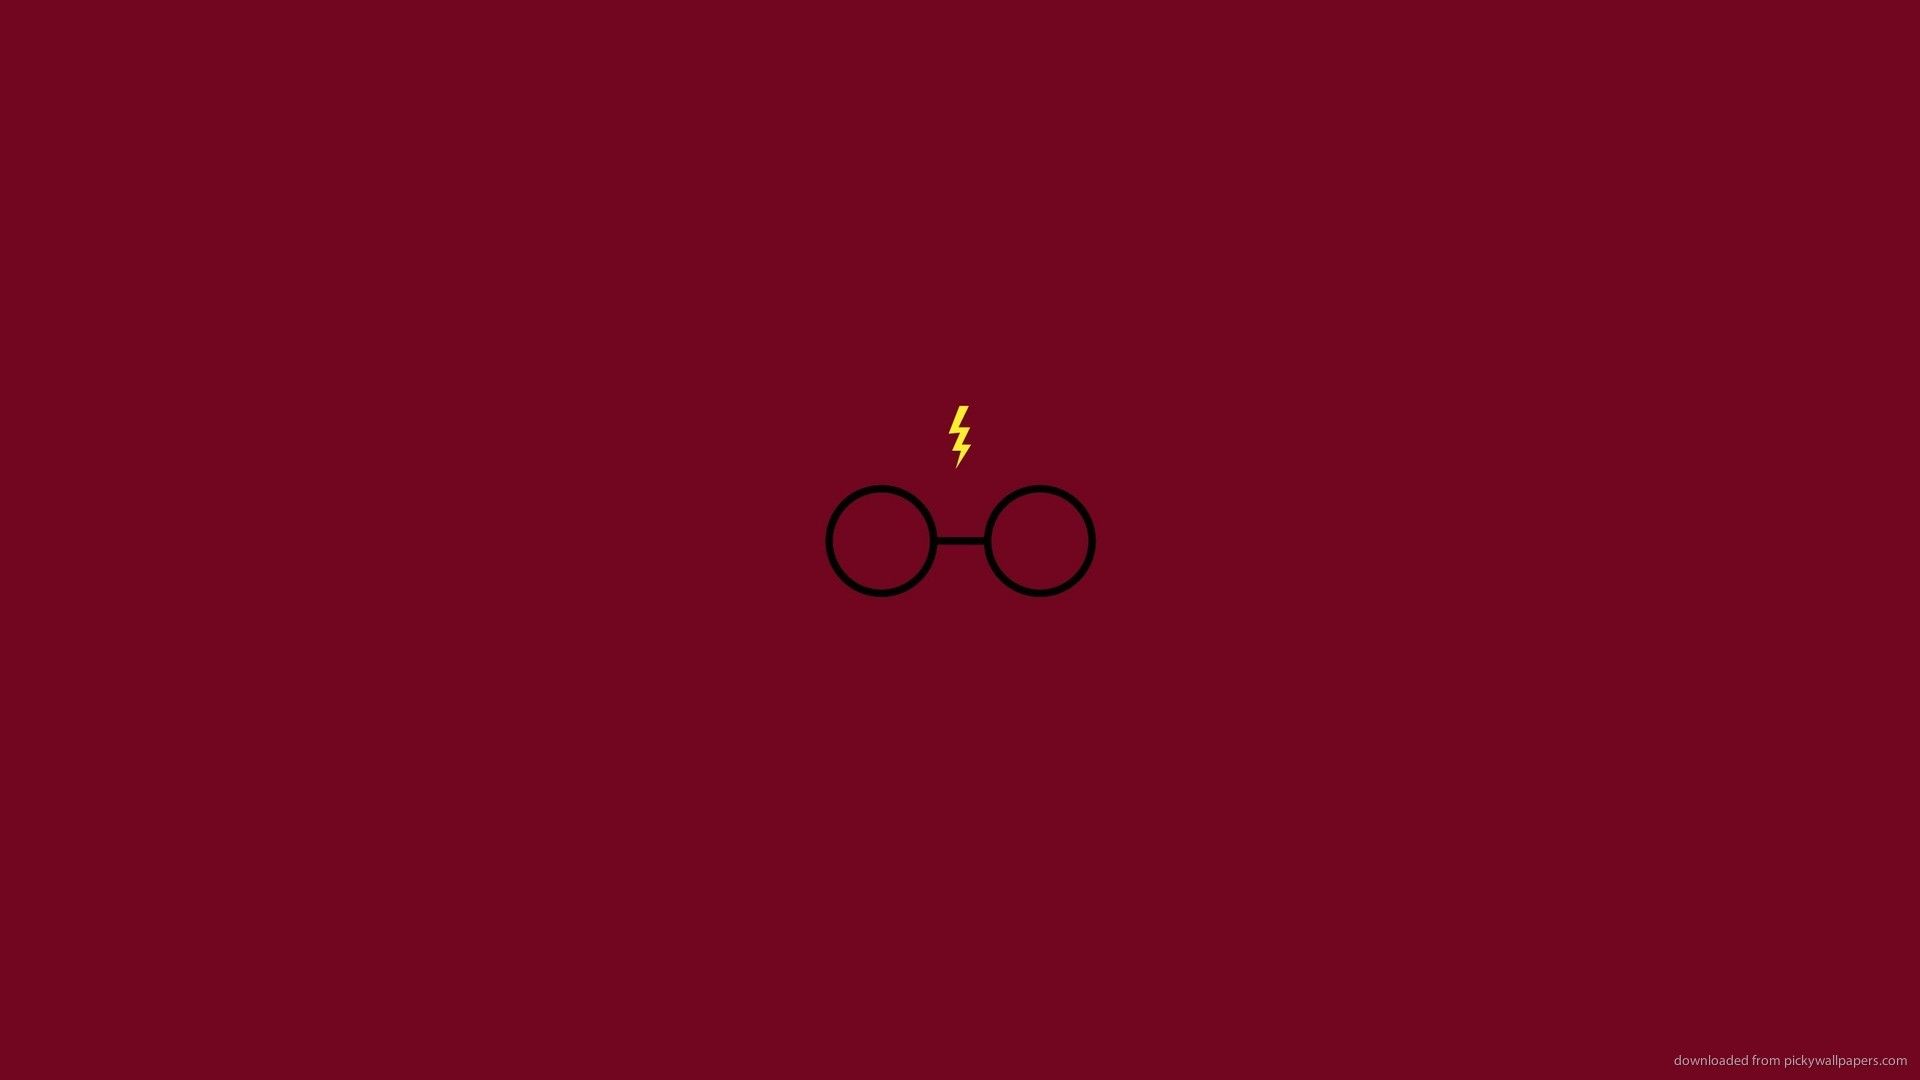 Cute Harry Potter Laptop Wallpapers Wallpapers